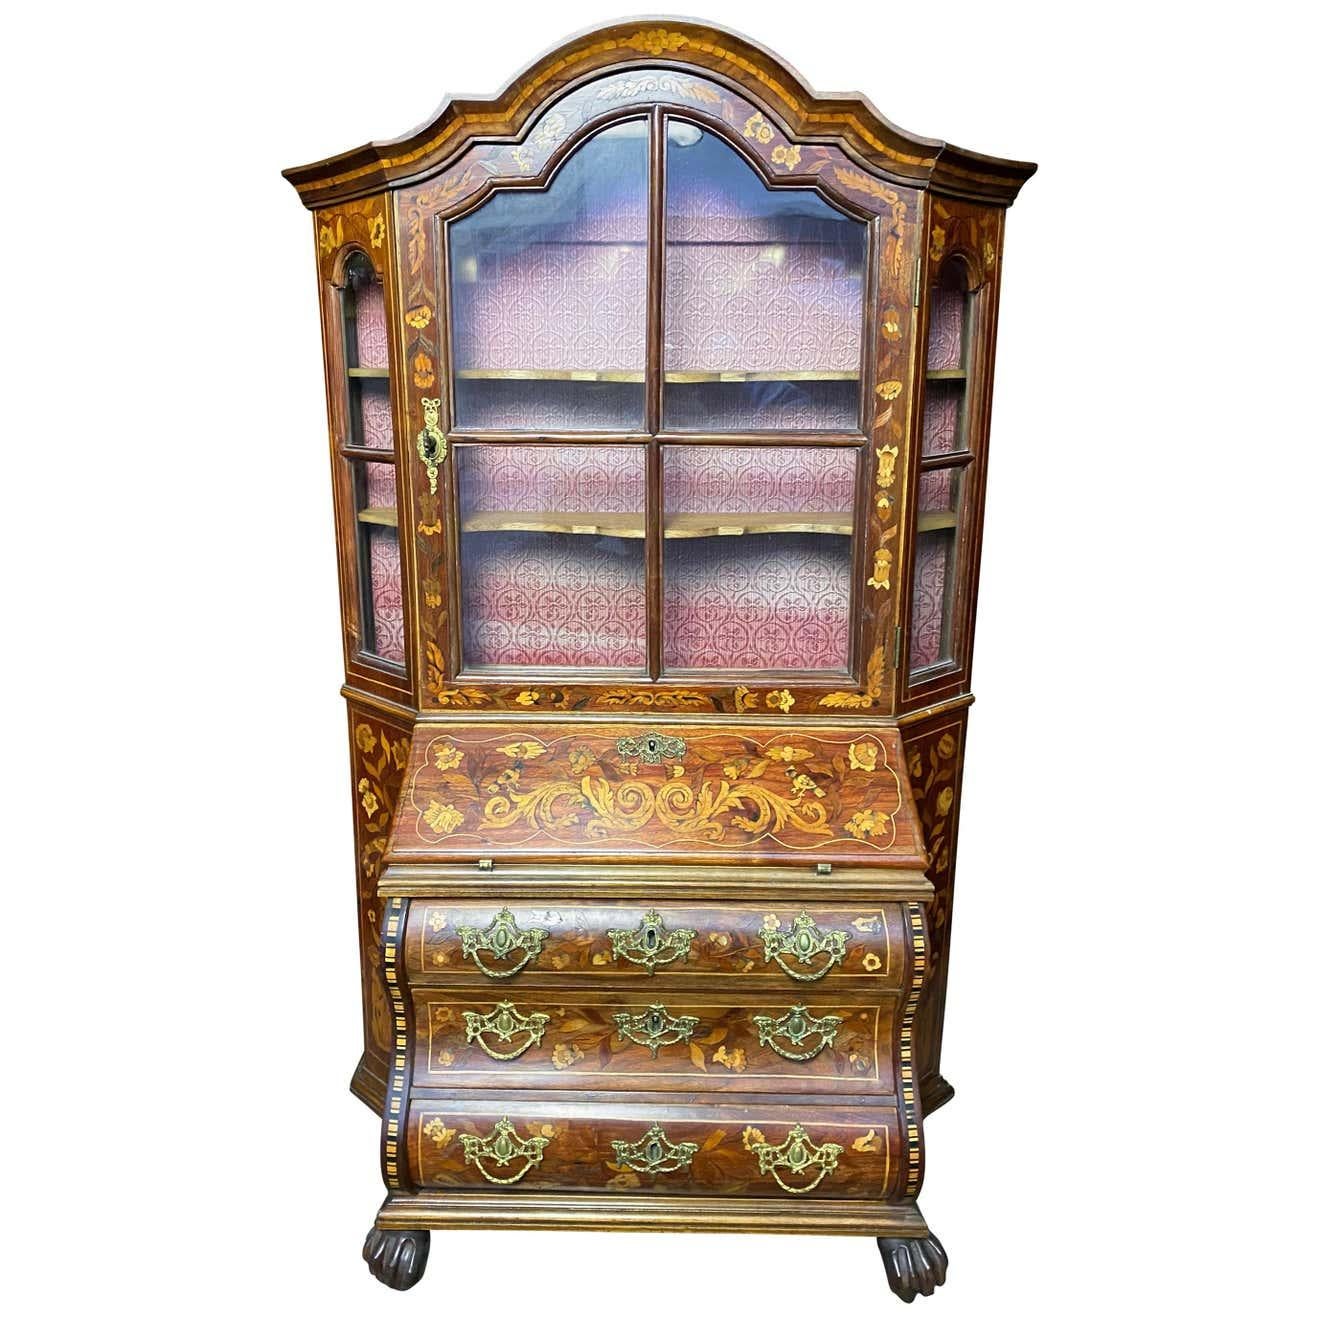 An 19th century Dutch walnut secretaire bookcase with undeniably striking colours. Several shelves open up to various platforms to provide a beautiful interior with a lock and key mechanism on the main door. A beautiful floral design extends over